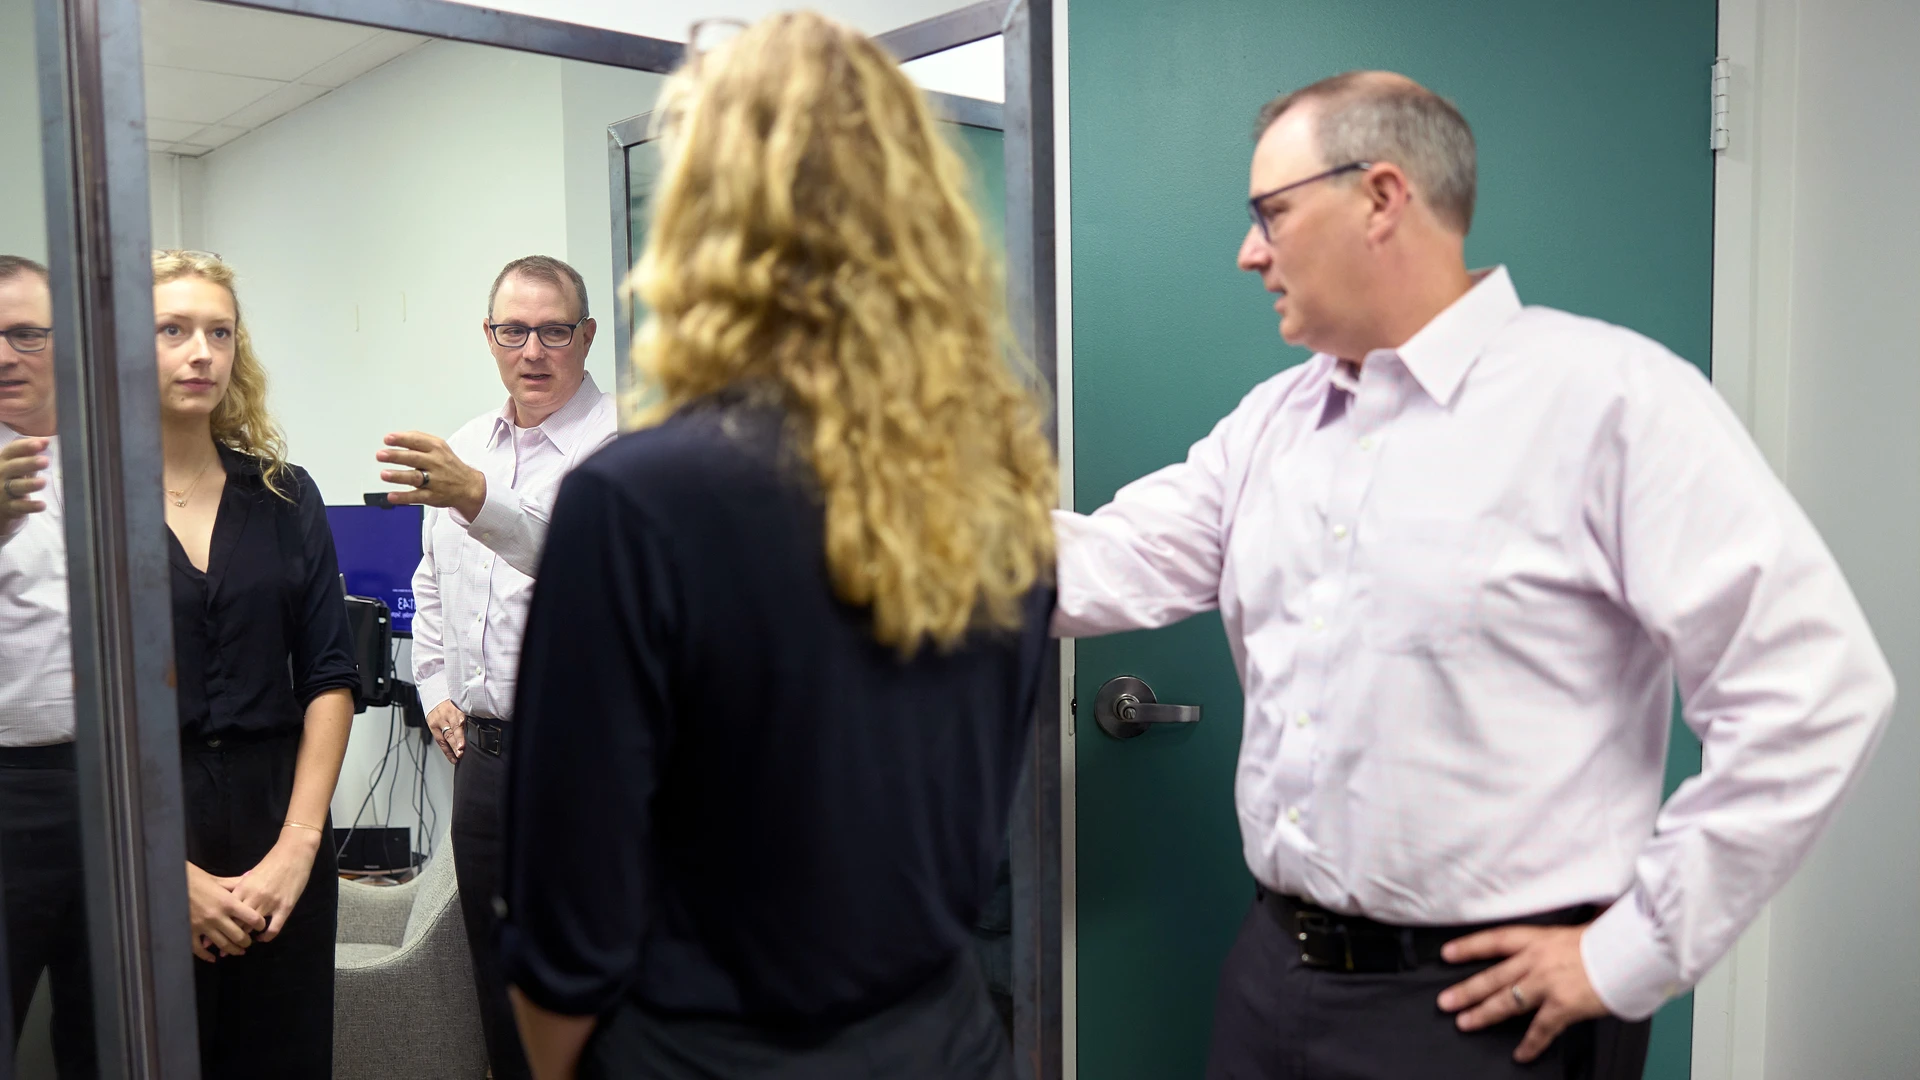 Dr. Hildebrandt (right) demonstrating to Webb (left) how to conduct acceptance-based mirror exposure therapy, in which patients learn to overcome negative body image.